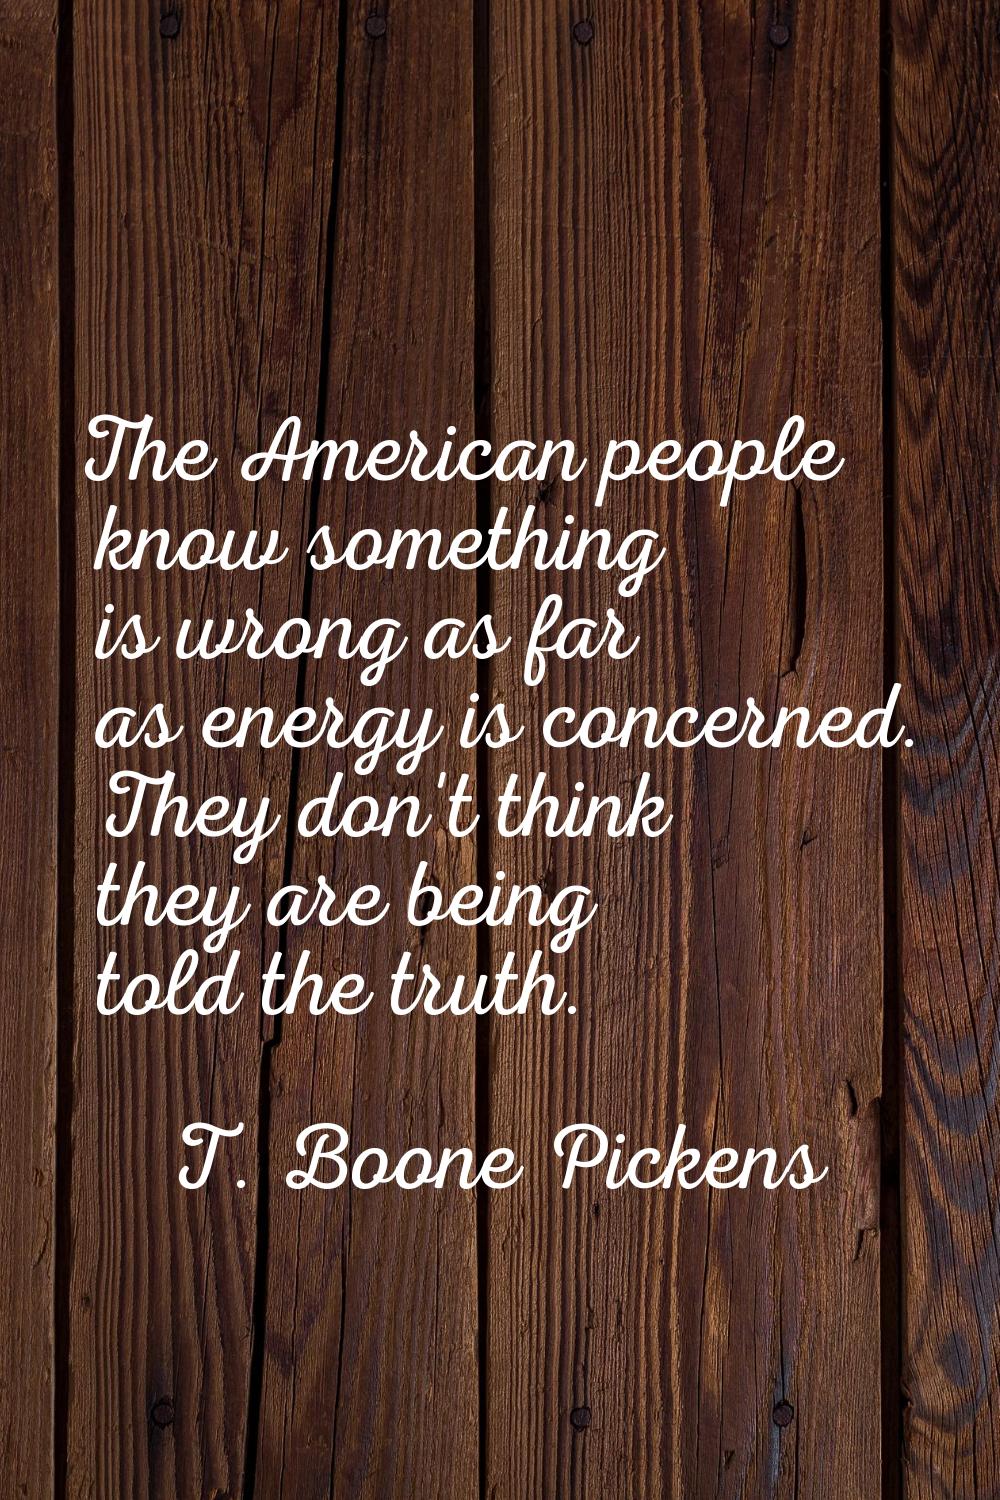 The American people know something is wrong as far as energy is concerned. They don't think they ar